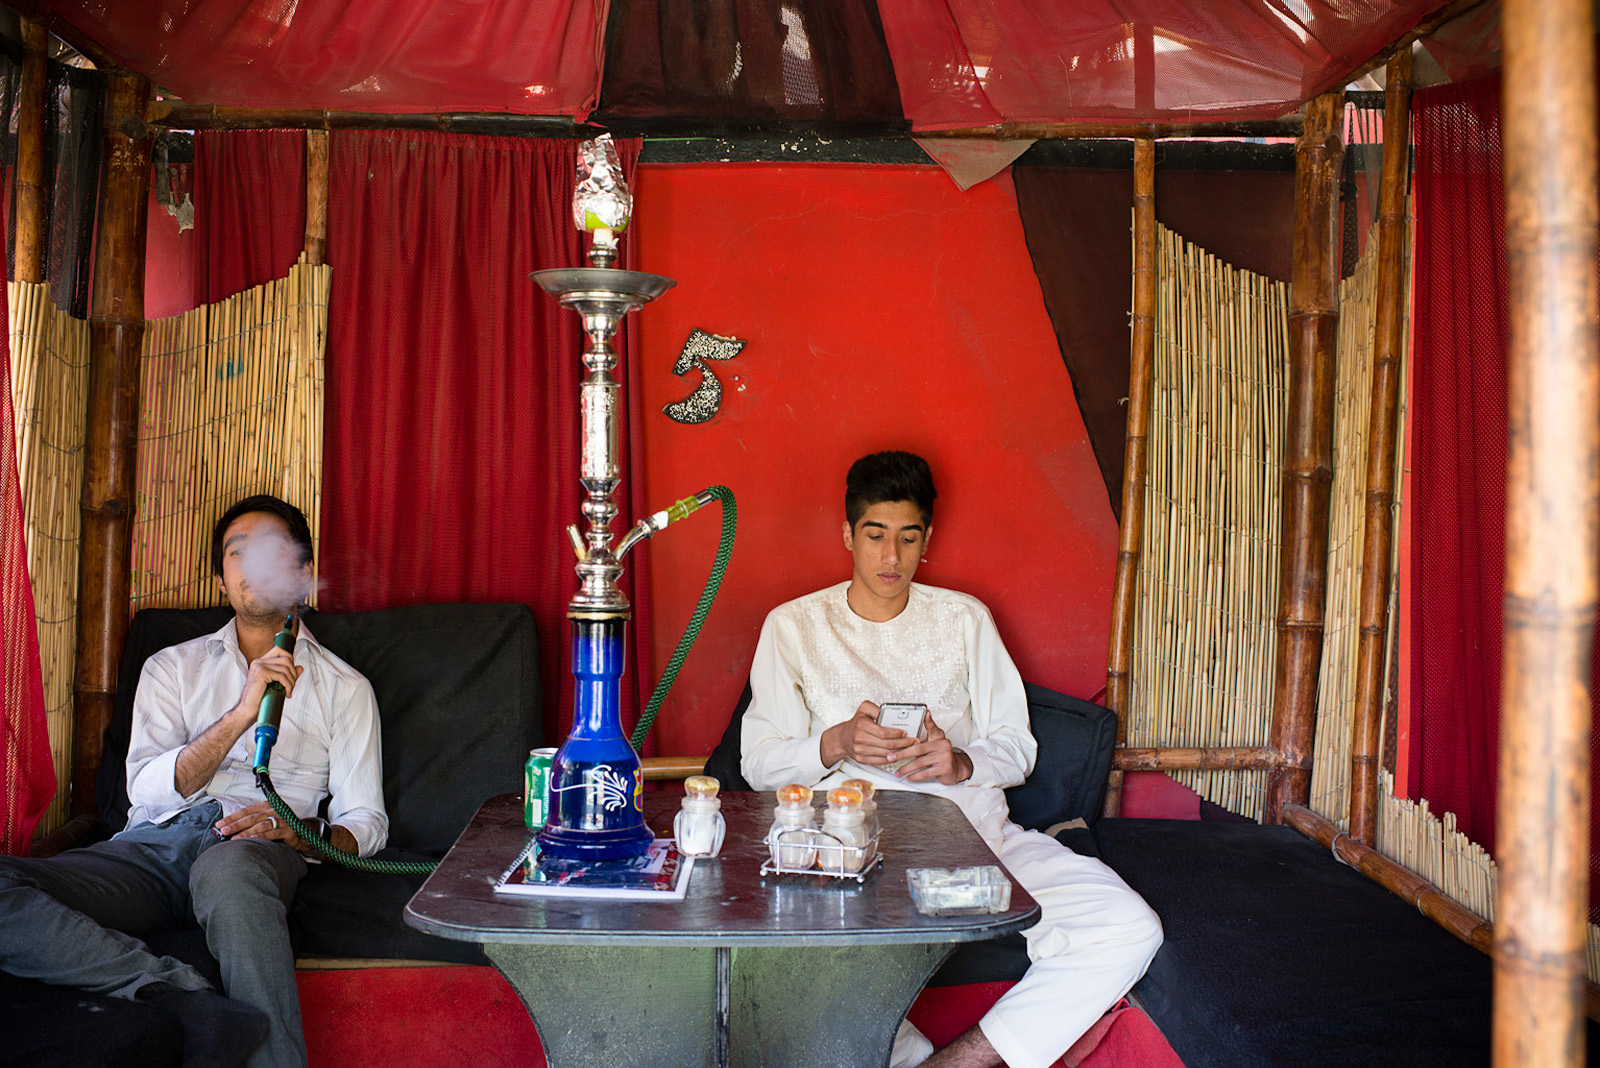 Young Afghan men, all in their early 20s, socialize and smoke hooka at Cafe Che, in Western Kabul. Cafe Che is one of the fewer cafes that have become very popular among young people in mixed groups as a meeting place. Kabul, Afghanistan, Aug. 10, 2014.